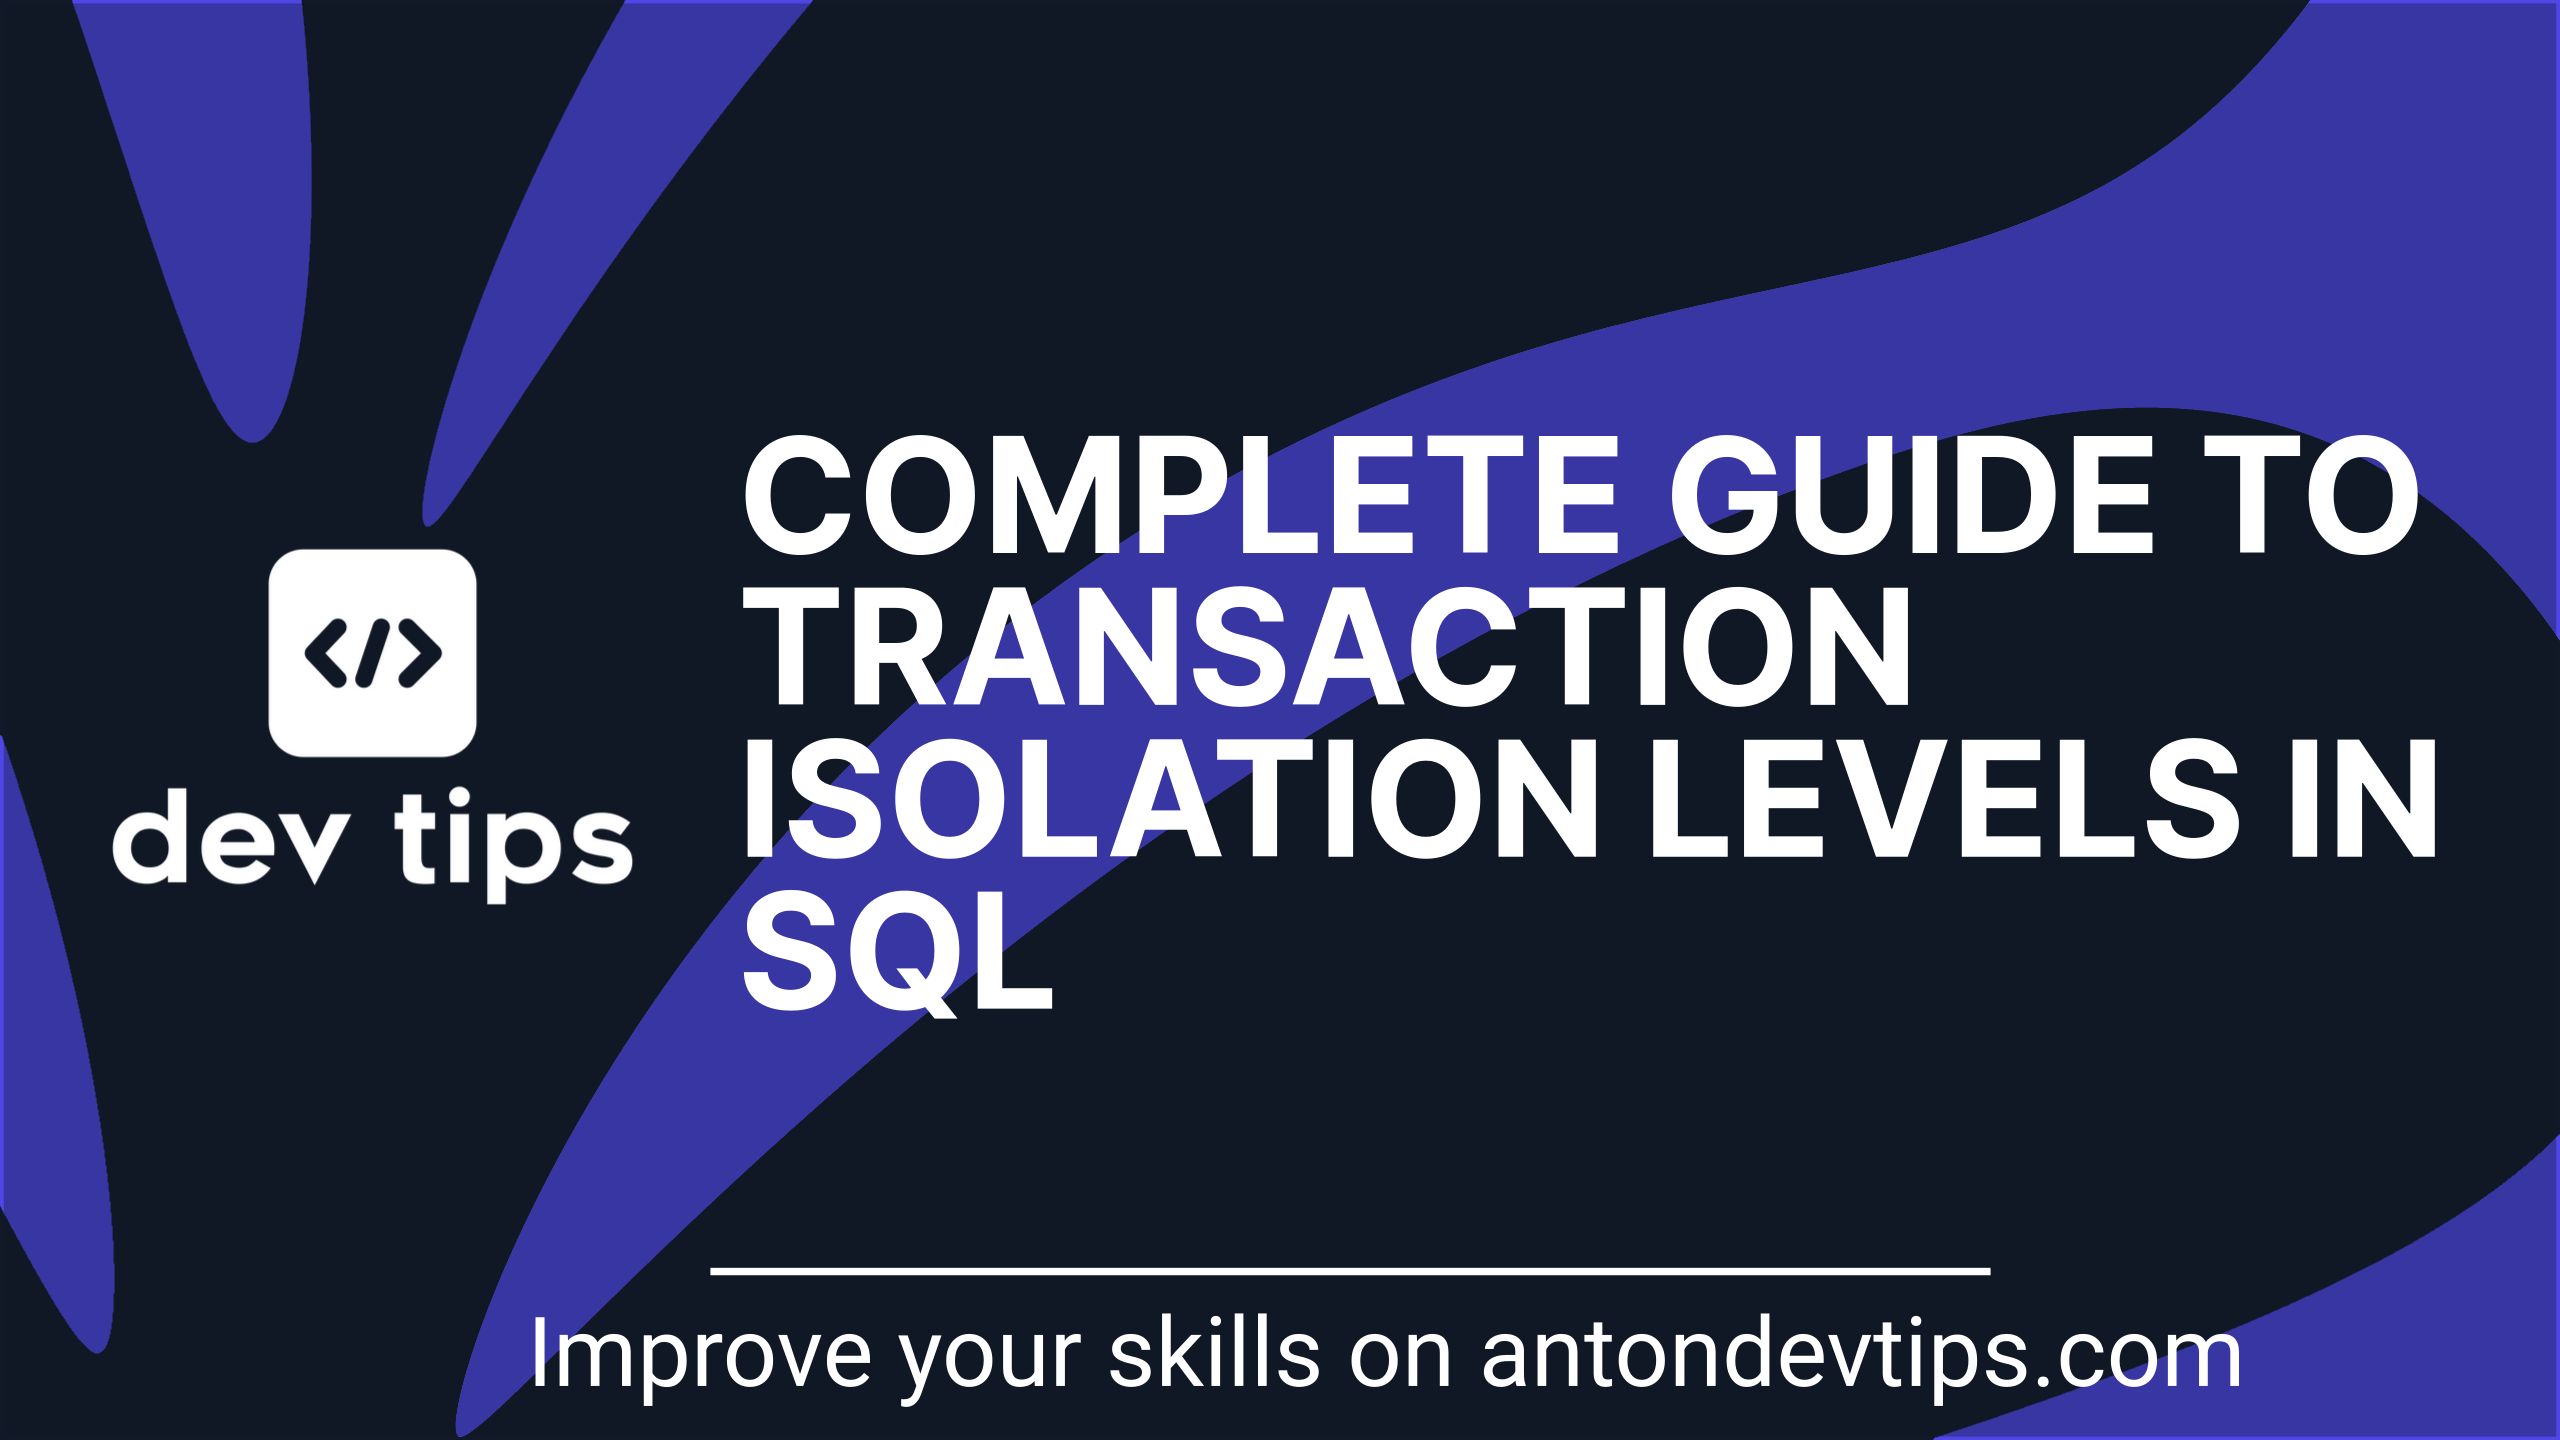 Complete Guide To Transaction Isolation Levels in SQL